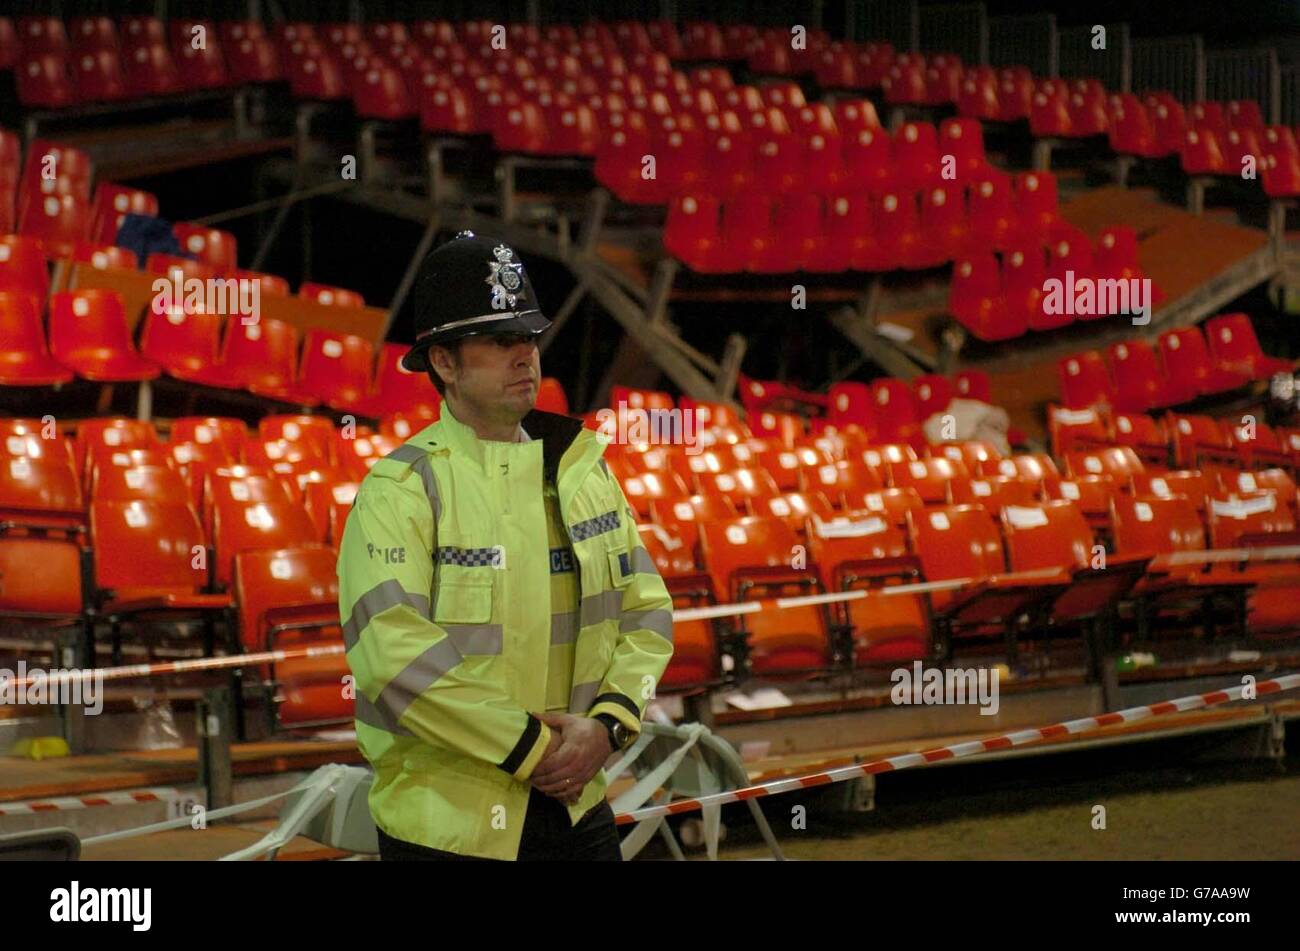 A police officer stands in front of a collapsed seating gallery at the Lincoln showground. The gantry gave way during a pop concert at the Grapevine Christian festival being held on the site. Stock Photo